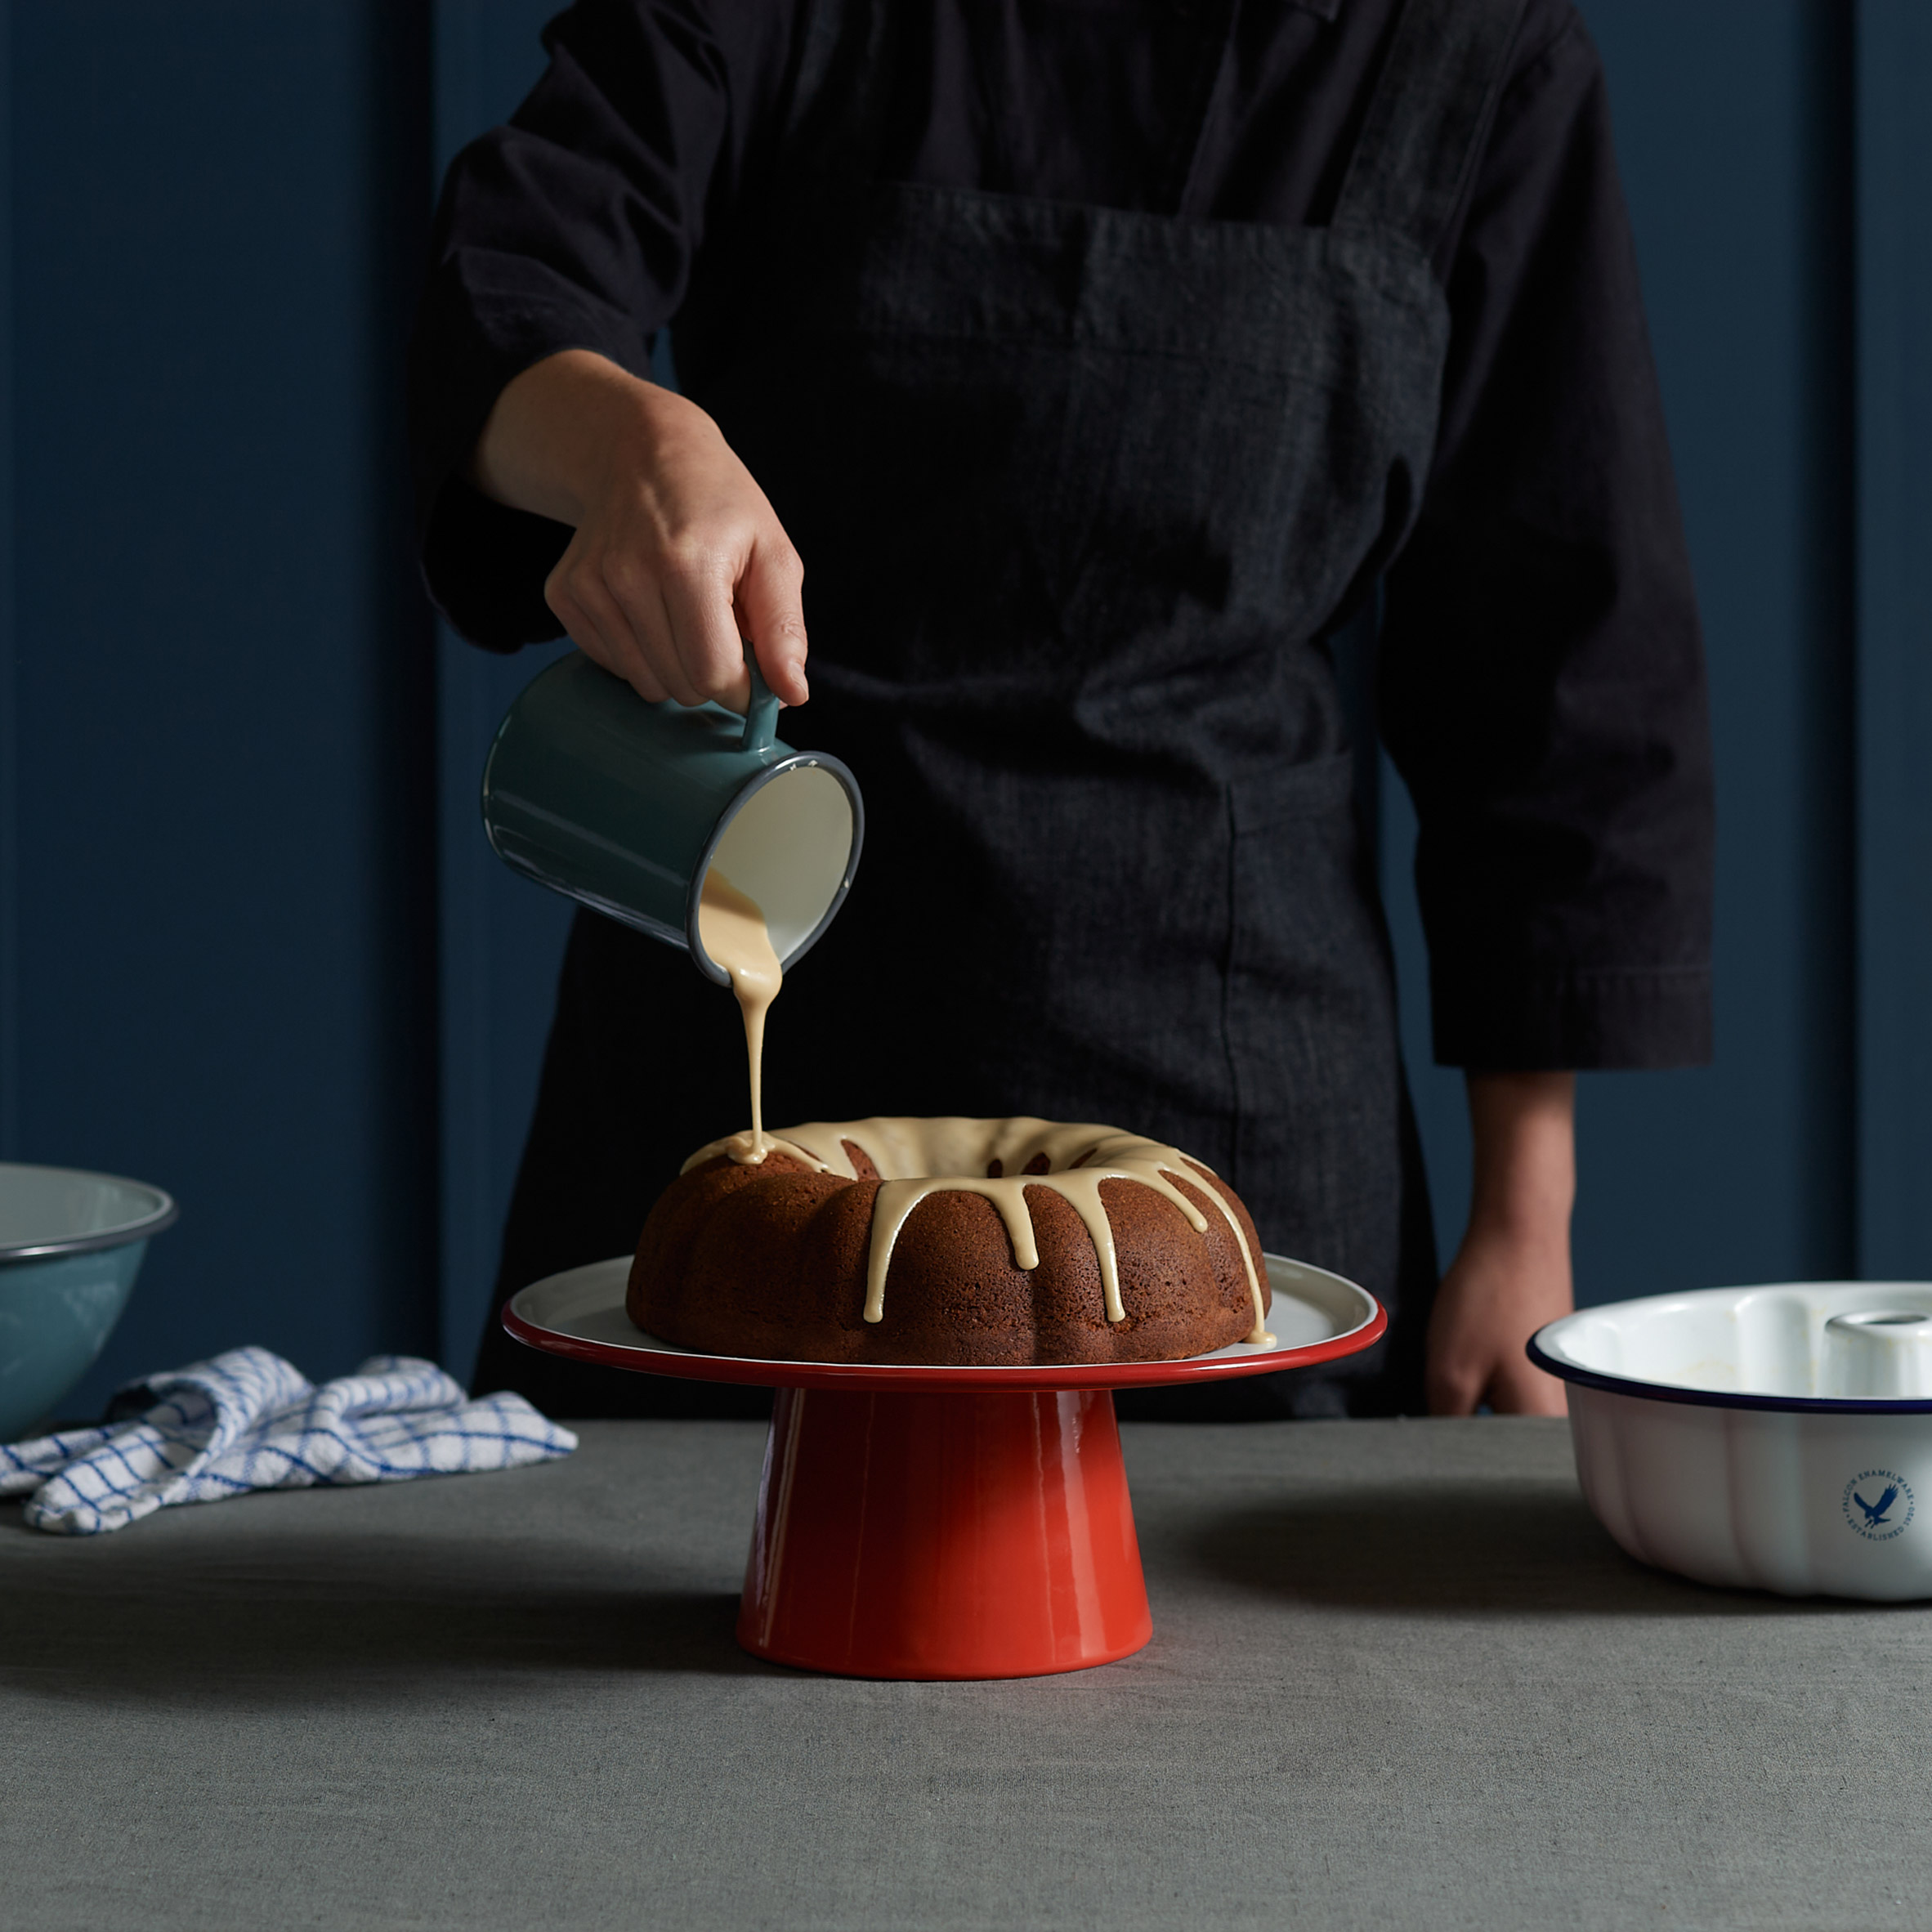 Falcon Enamelware cake stand and cake tin